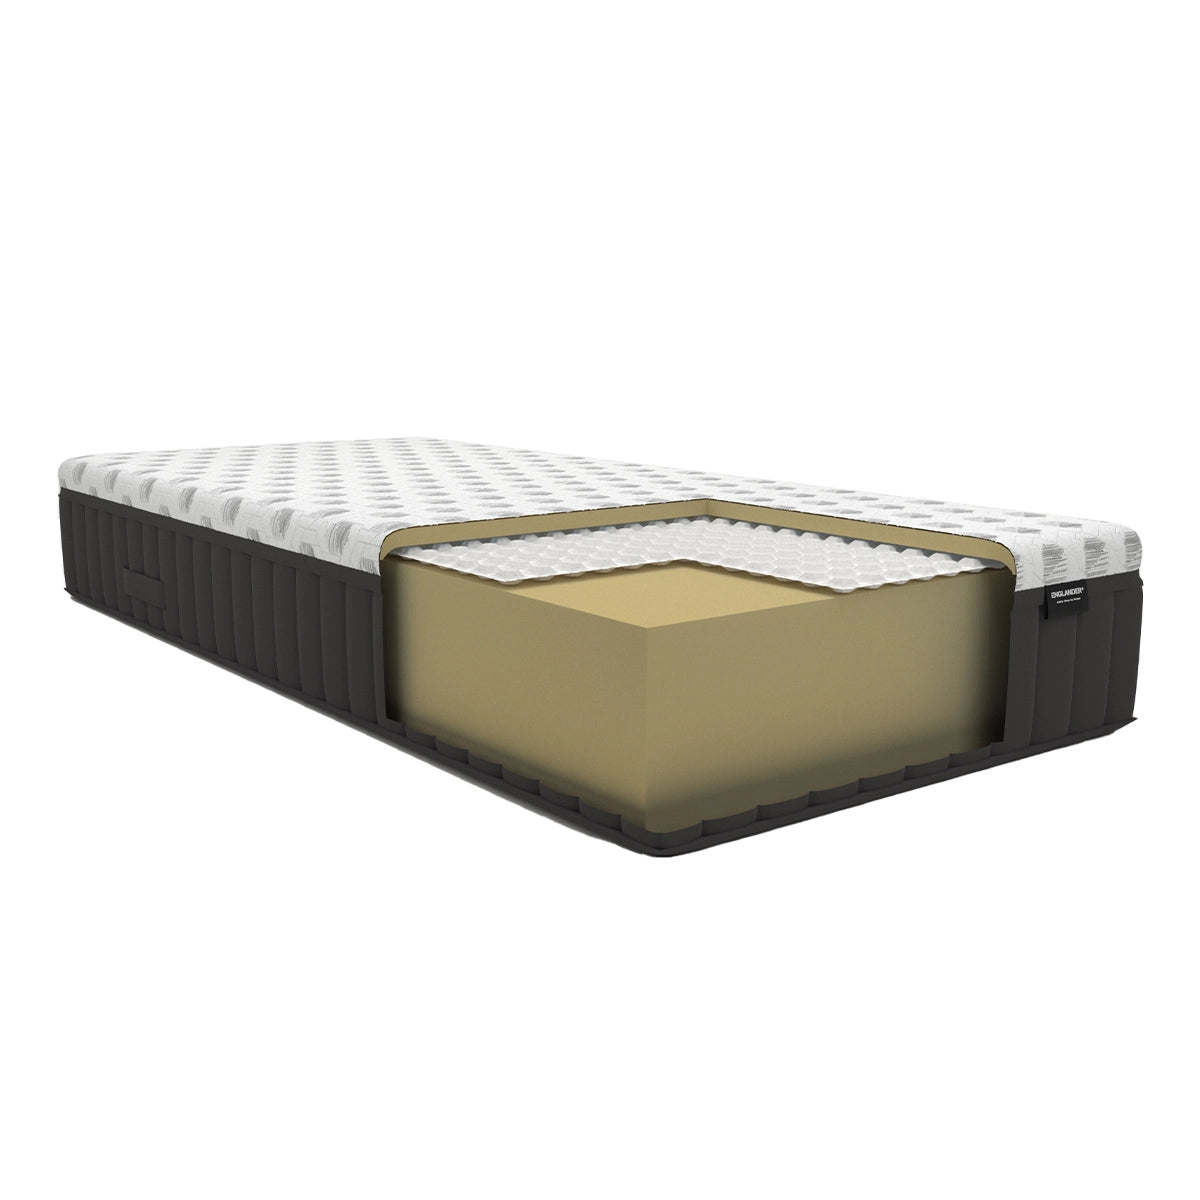 Notting Viscopedic Hybrid Mattress by Englander, Image of the Materials used inside the Mattress, Firm